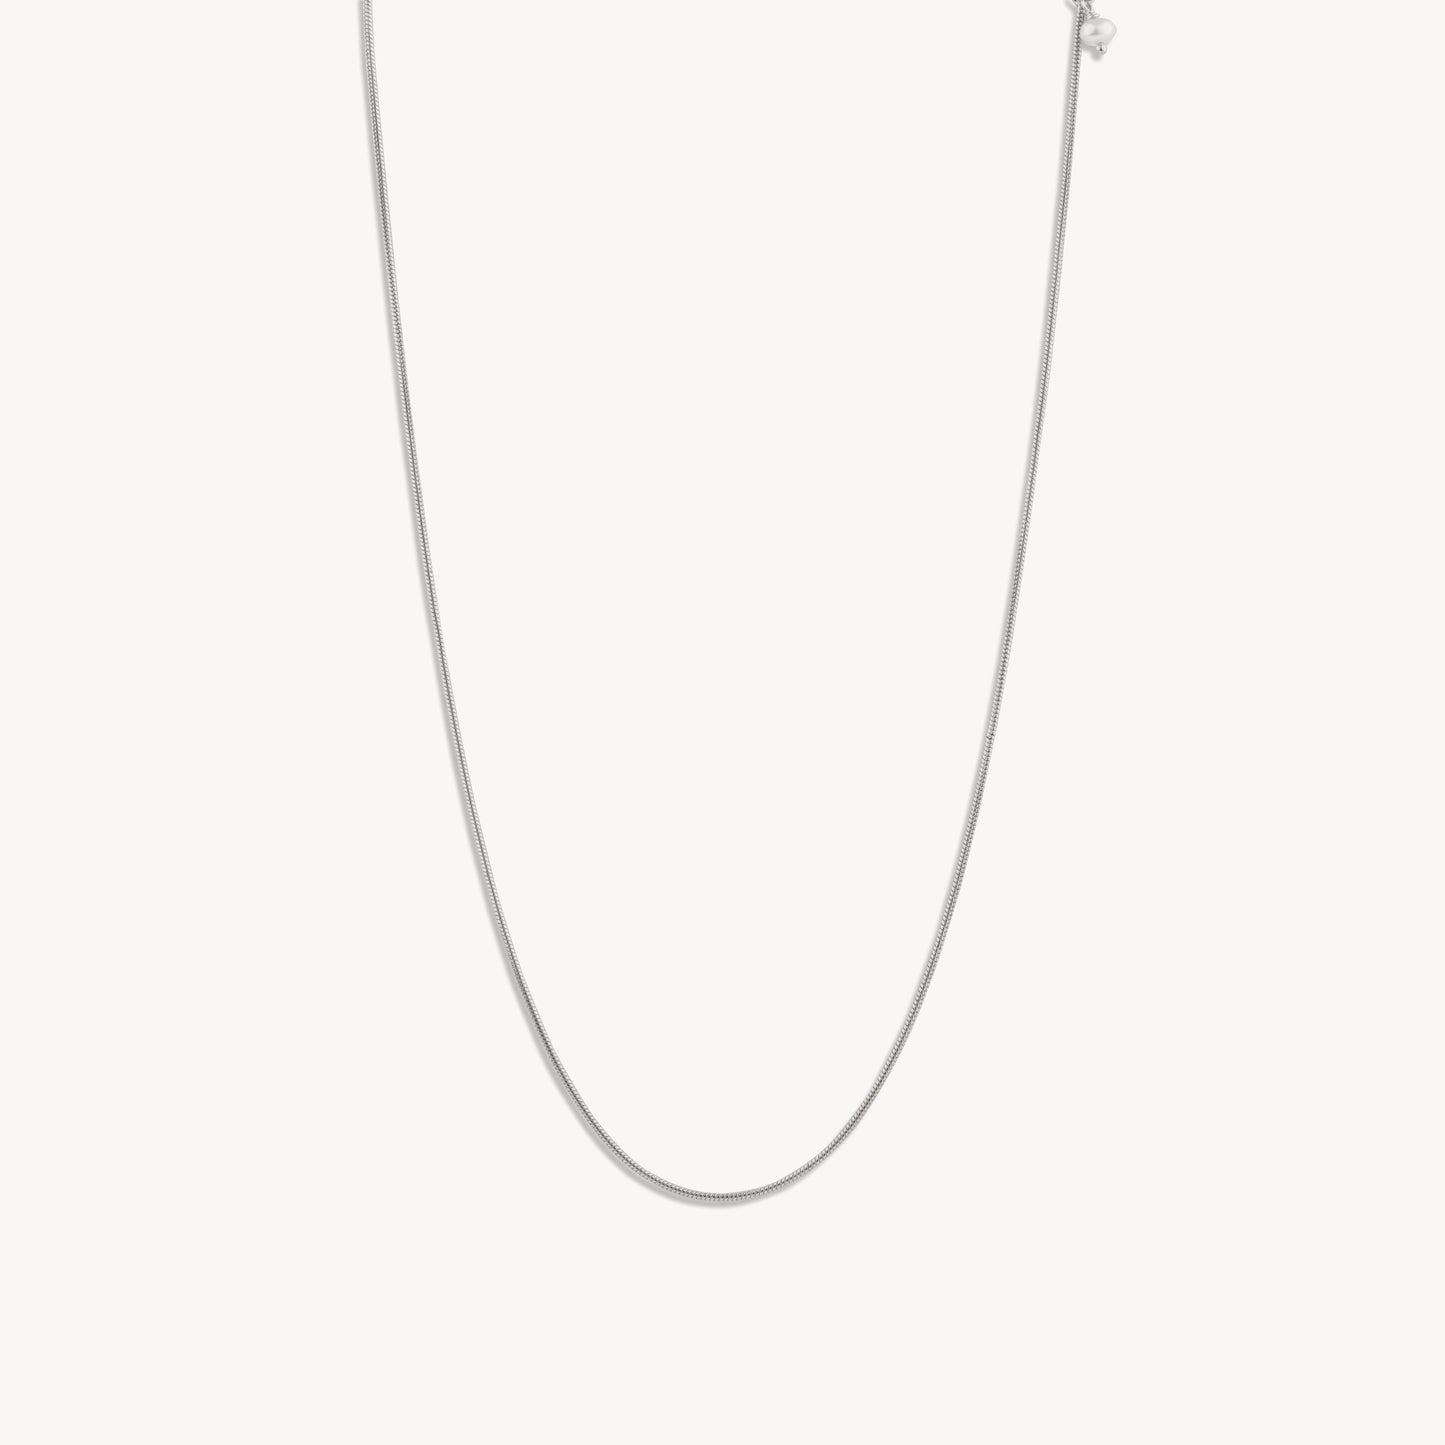 Remi necklace